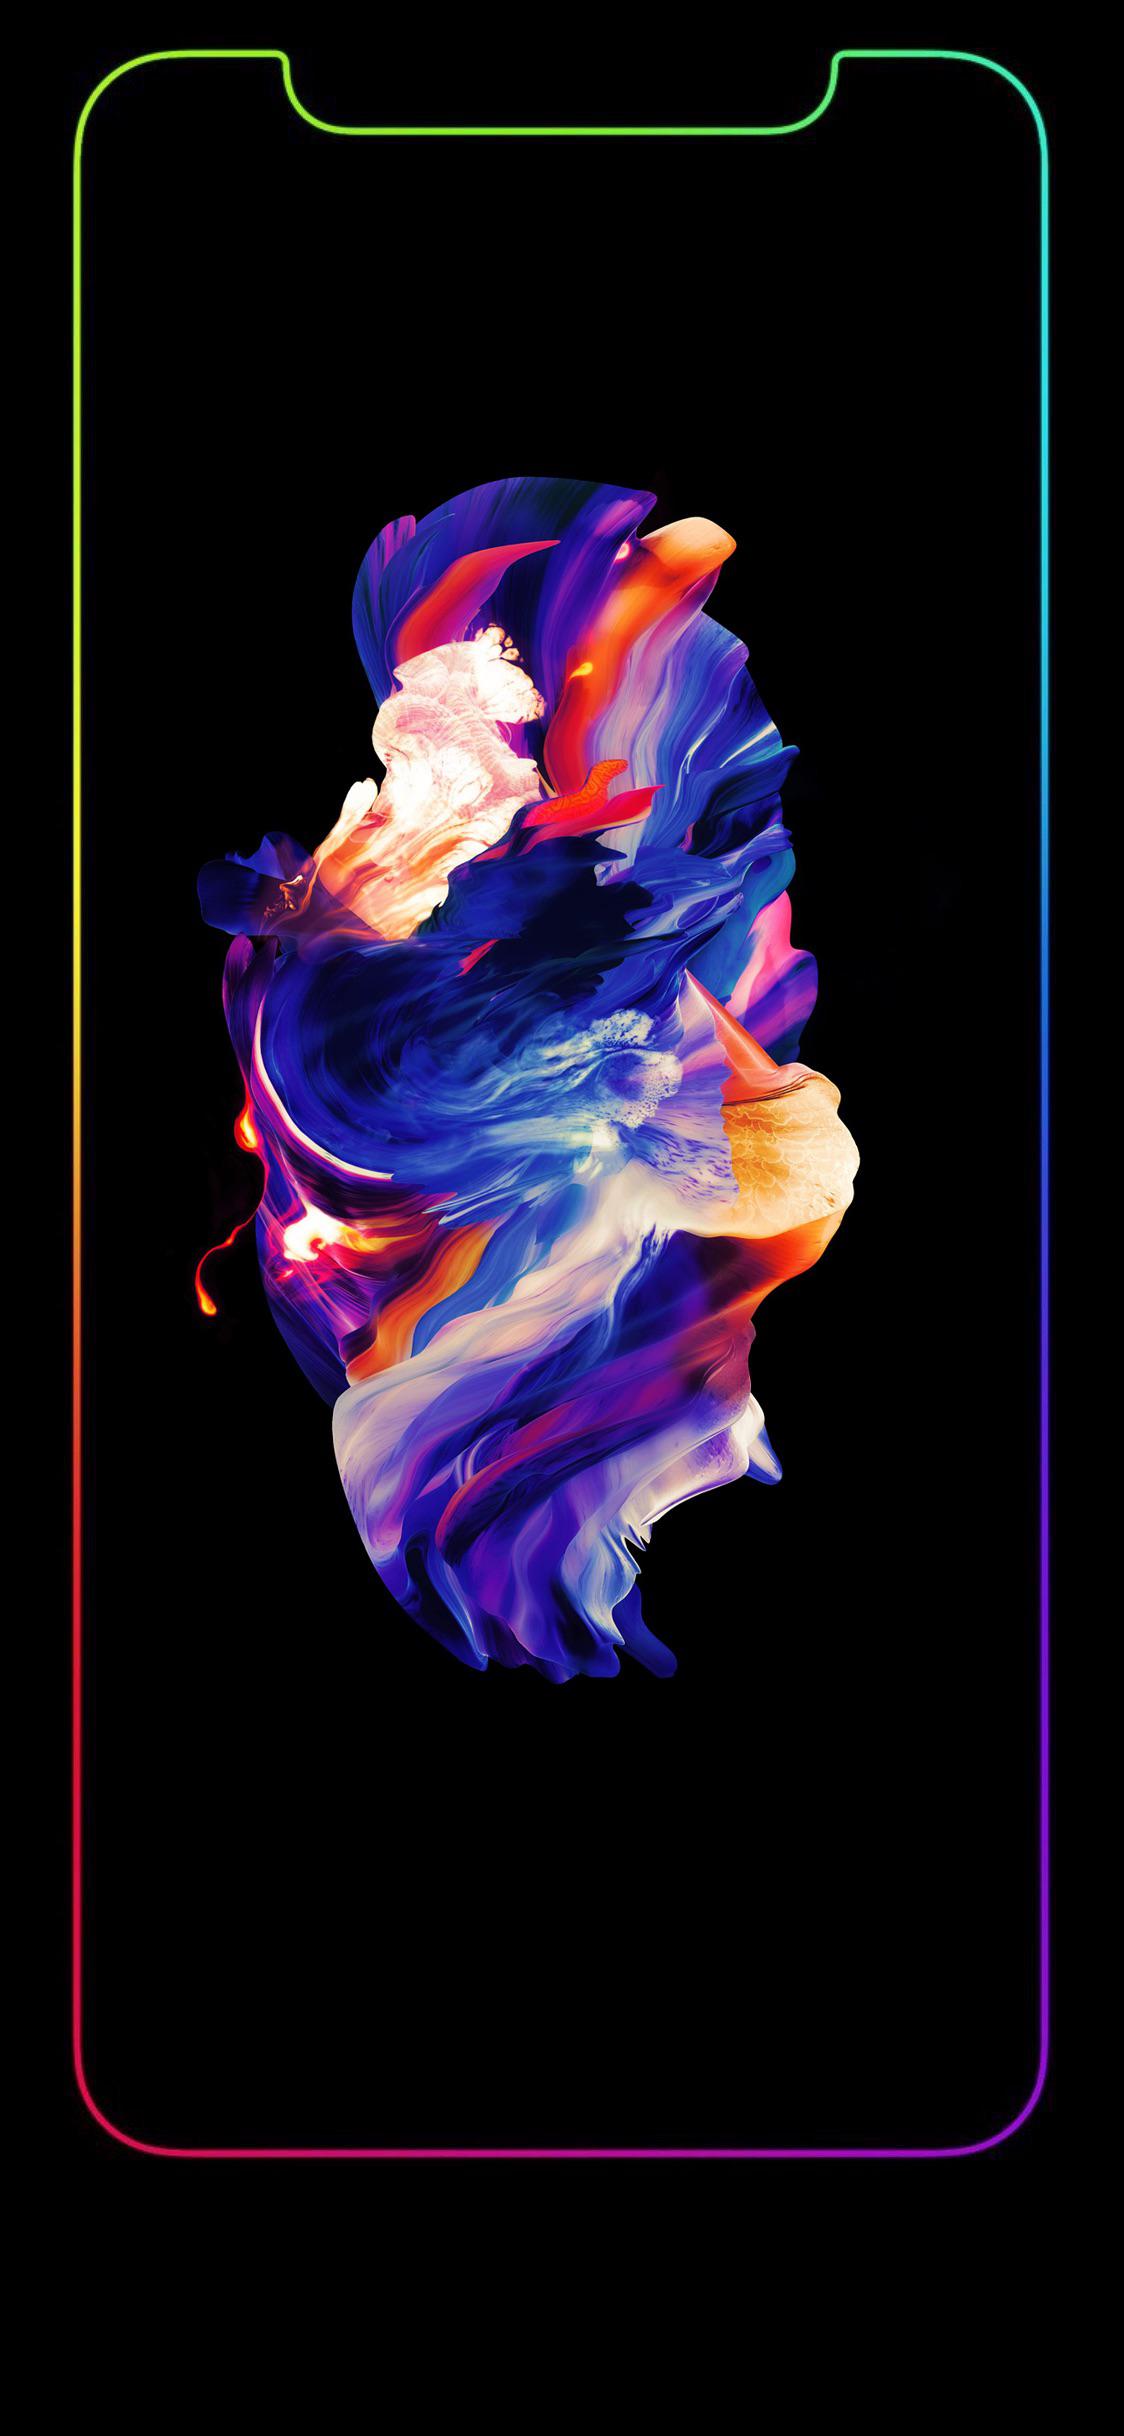 awesome black wallpapers for iphone x's oled screen (ep. 8 on iphone xs oled wallpapers